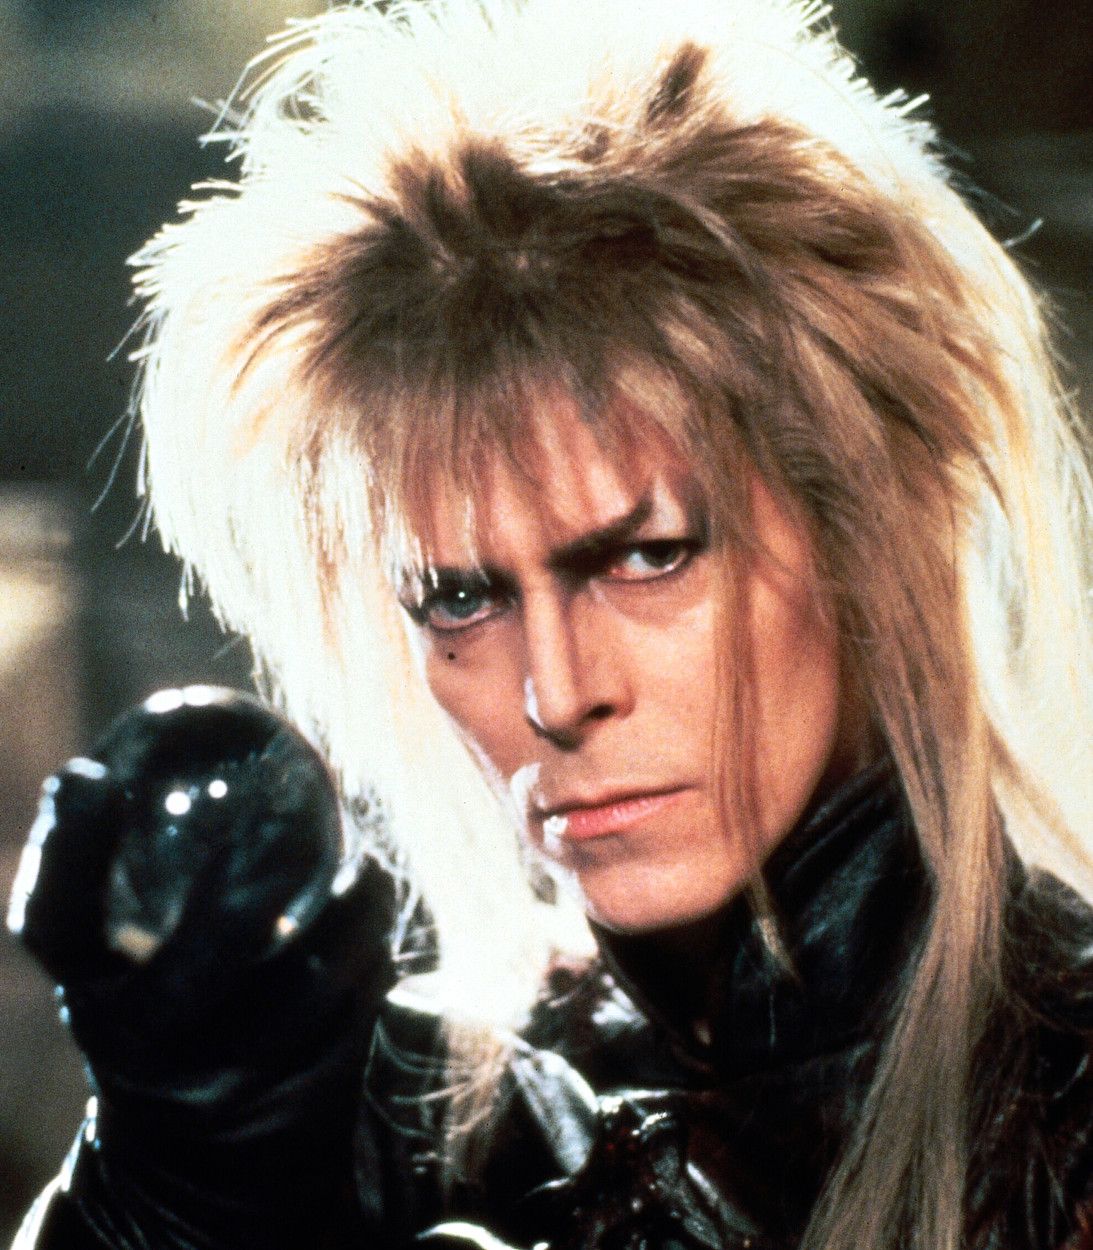 David Bowie as The Goblin King in Labyrinth